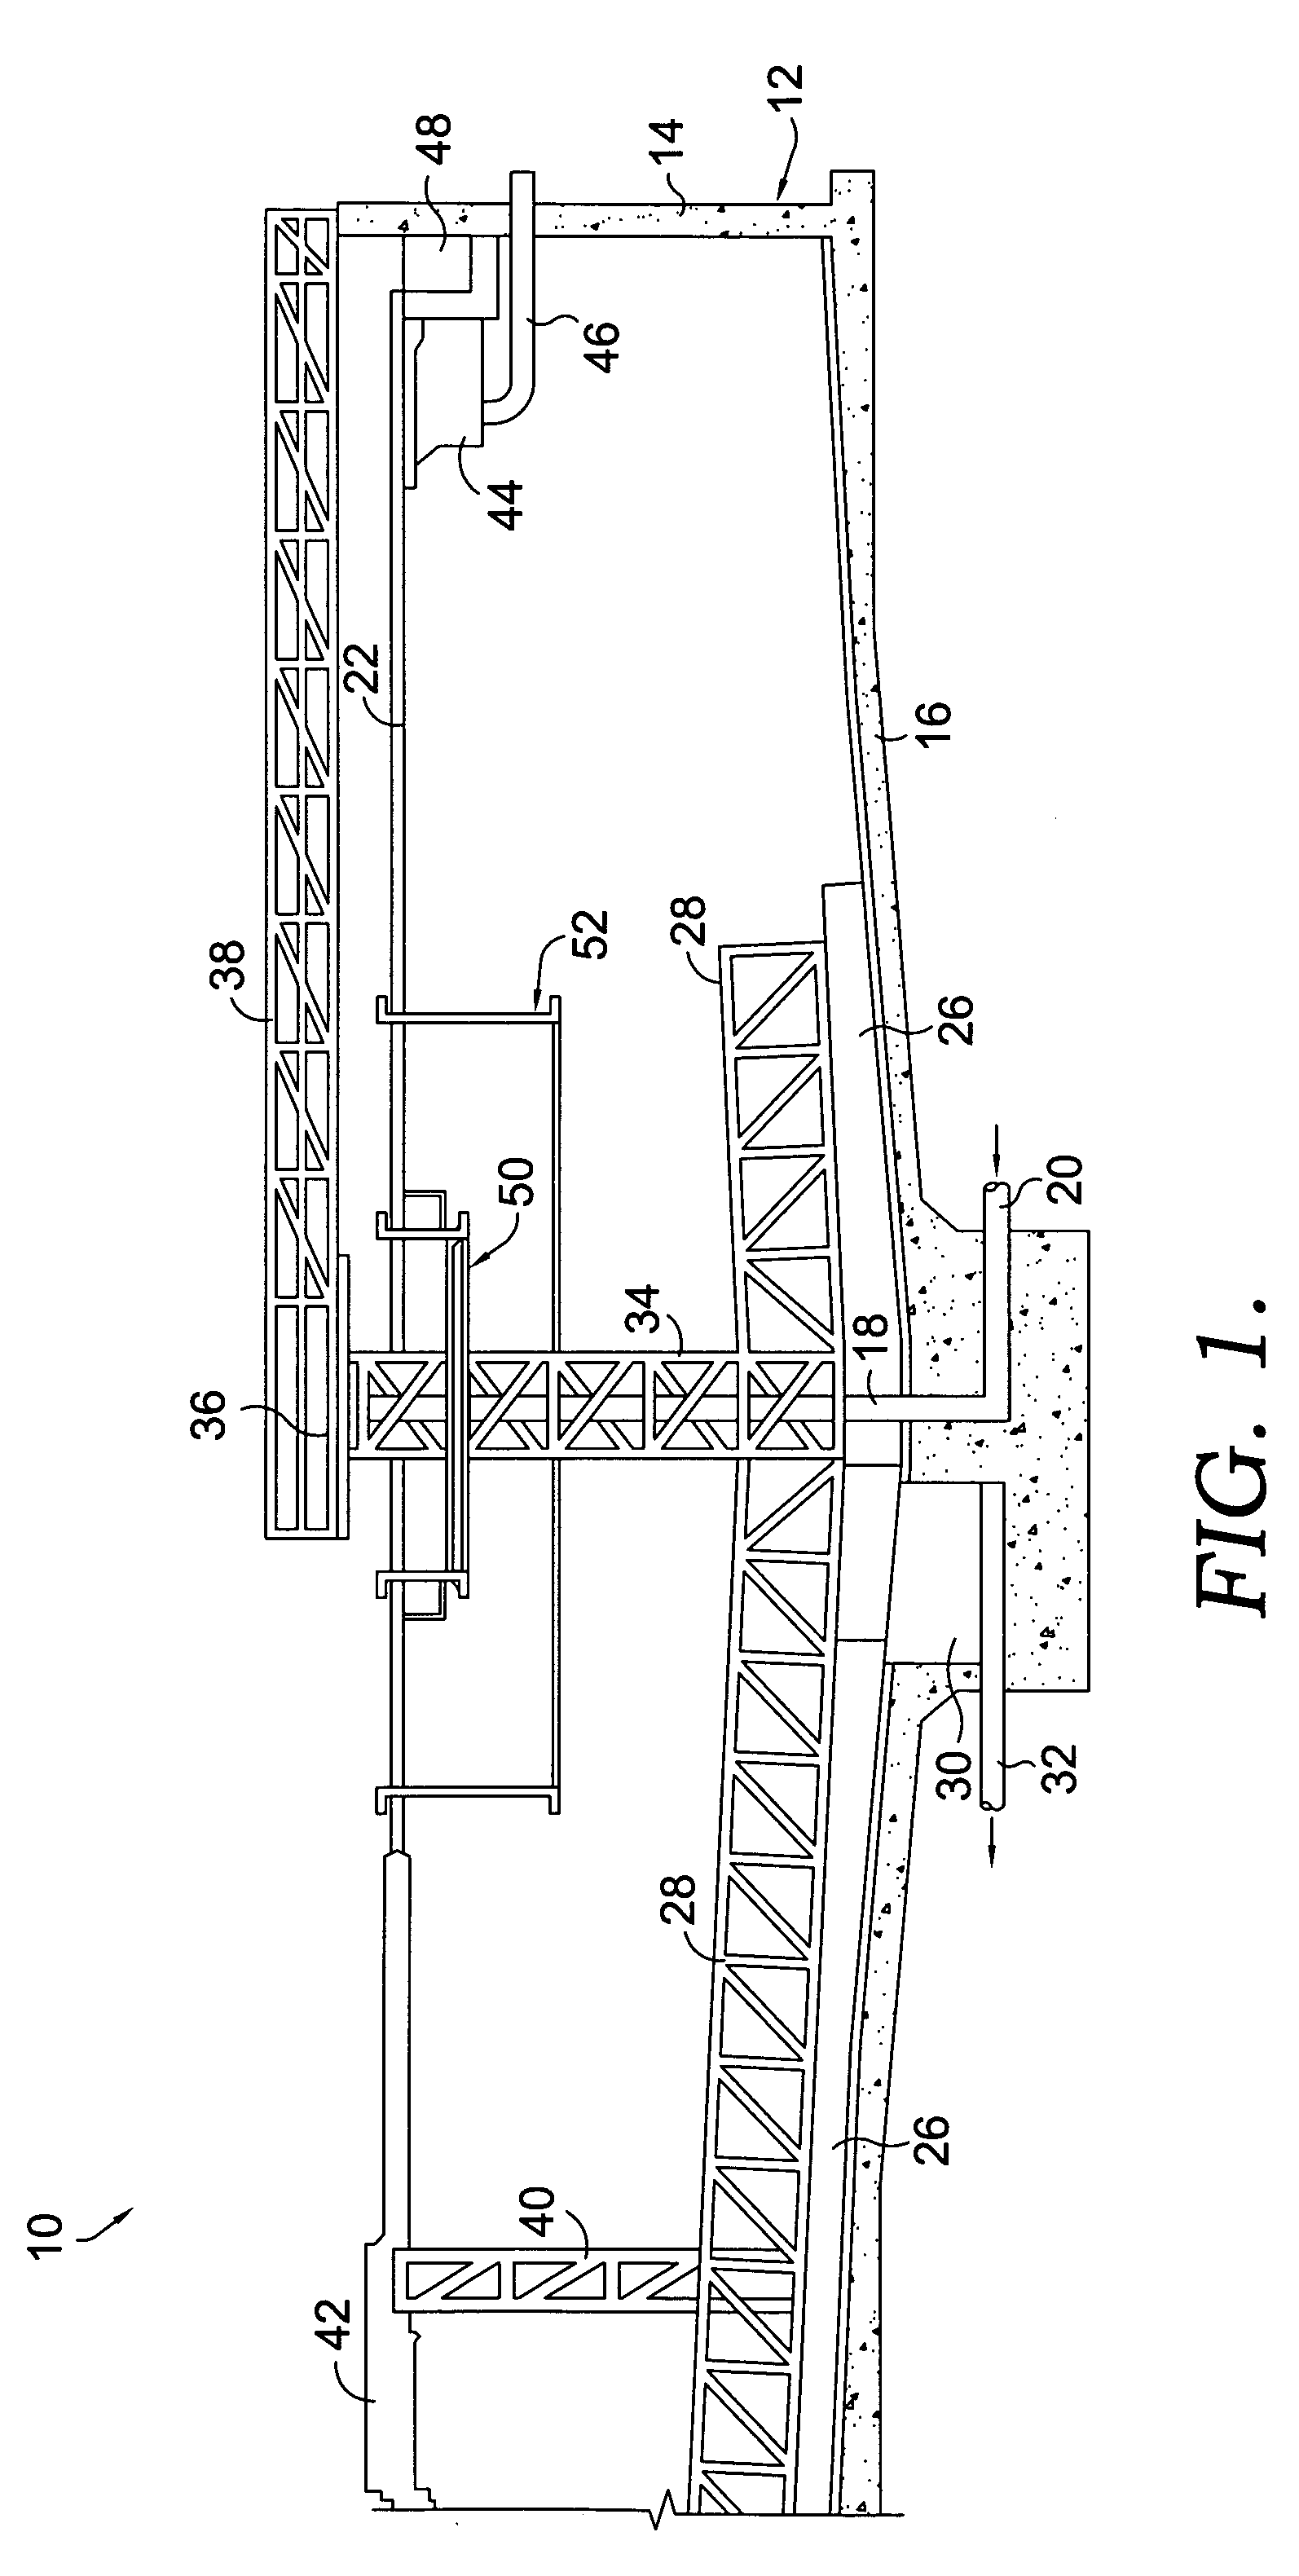 Inlet structure for clarifiers